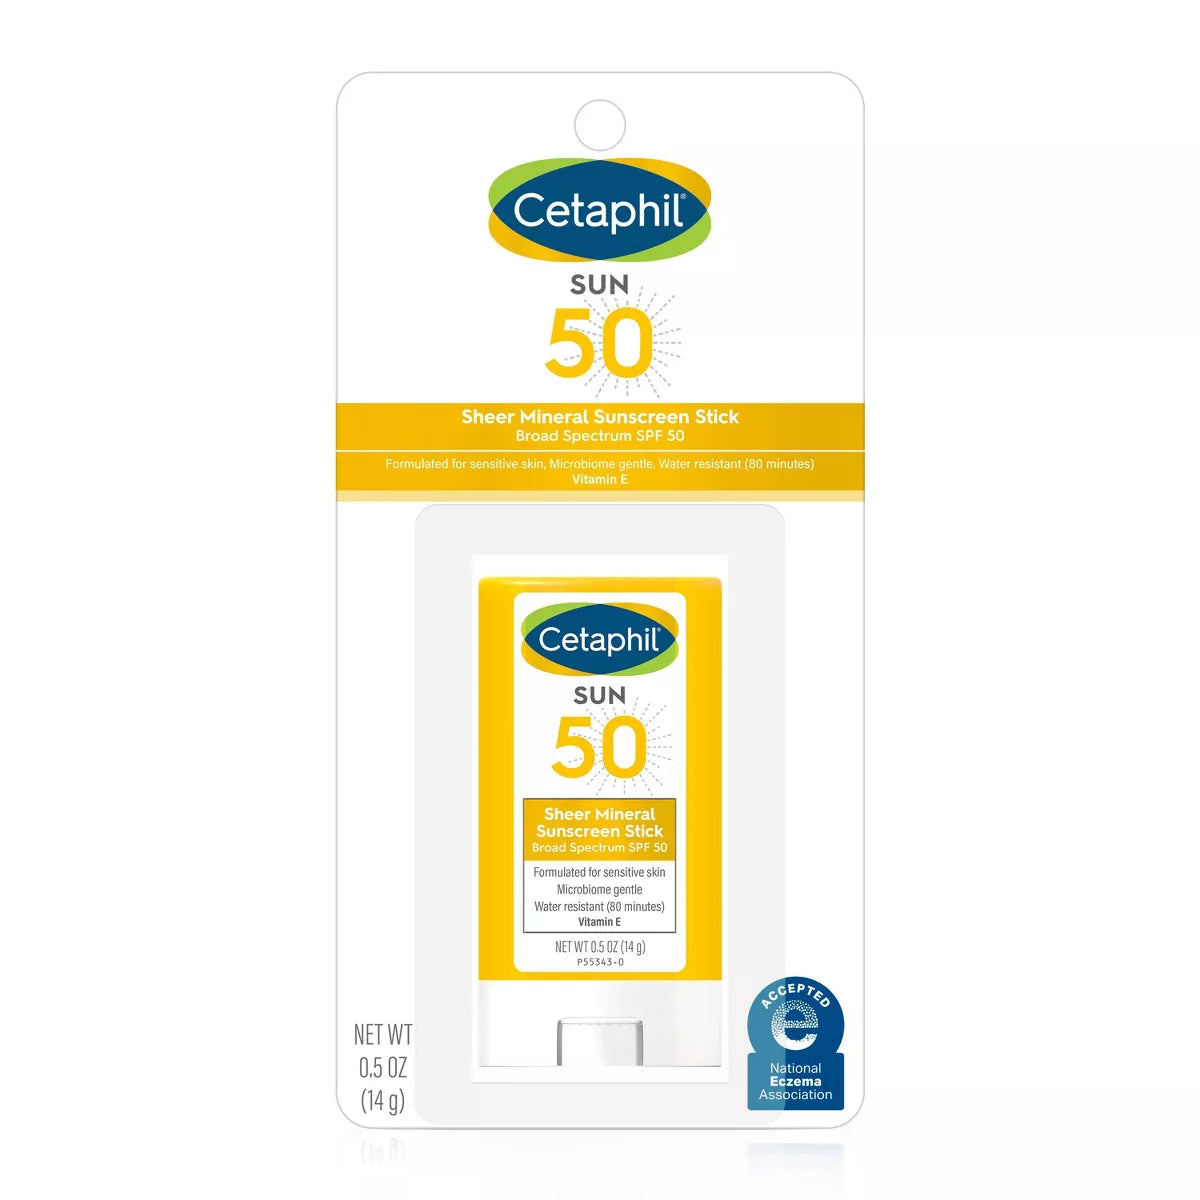 Cetaphil Sheer Mineral Sunscreen Stick for Face & Body - SPF 50 (14g) Cetaphil